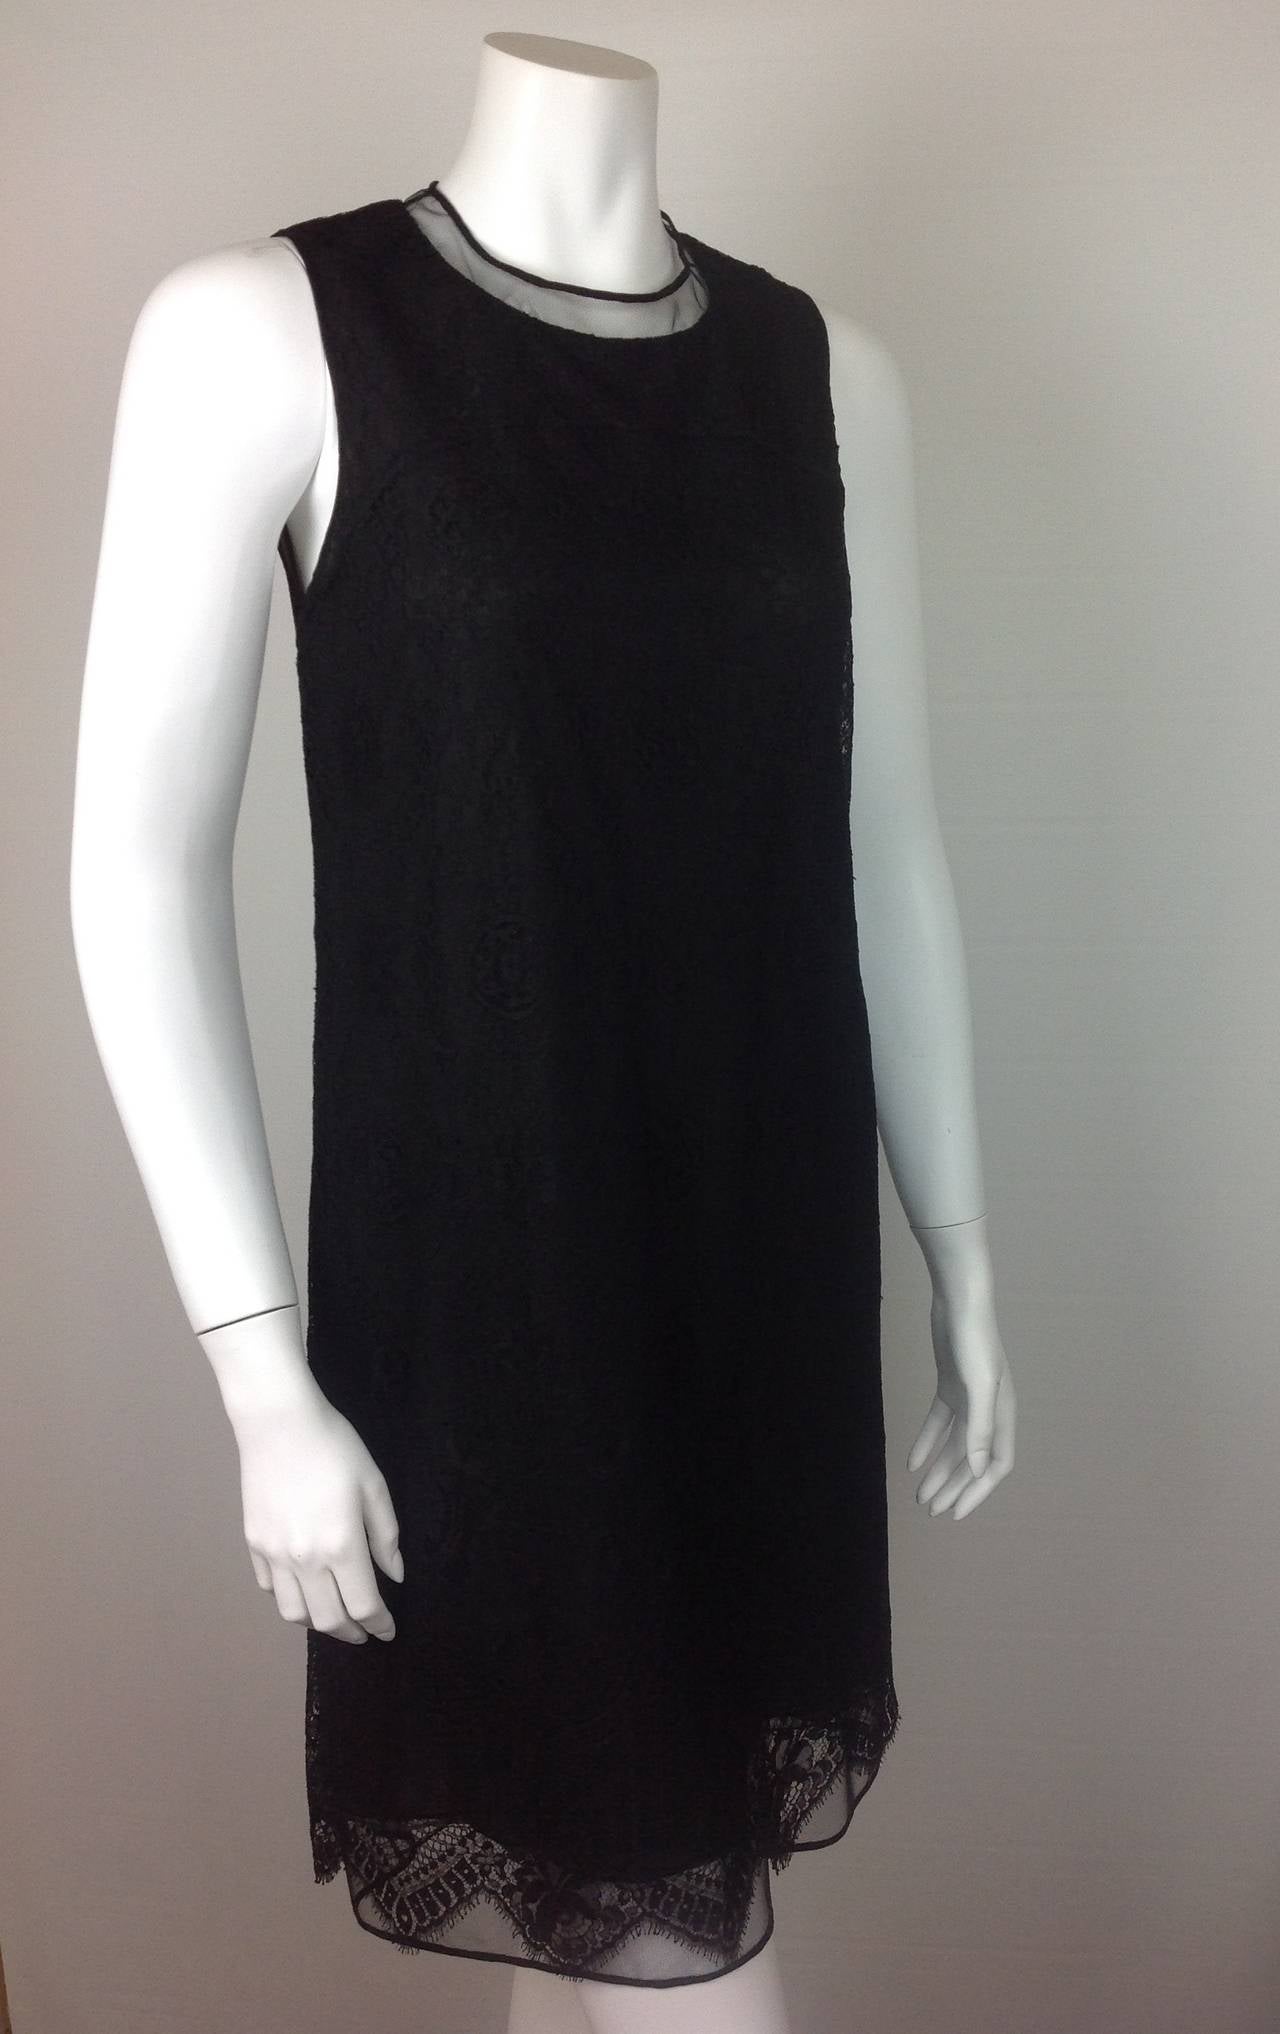 Gorgeous featherweight black lace sheath dress by Ralph Rucci.
Signature tulle at the neckline, and hemline. Beautifully made..
Lightweight silk lace, backed with signature tulle.  Lined in one layer of black silk, and two layers of nude silk -